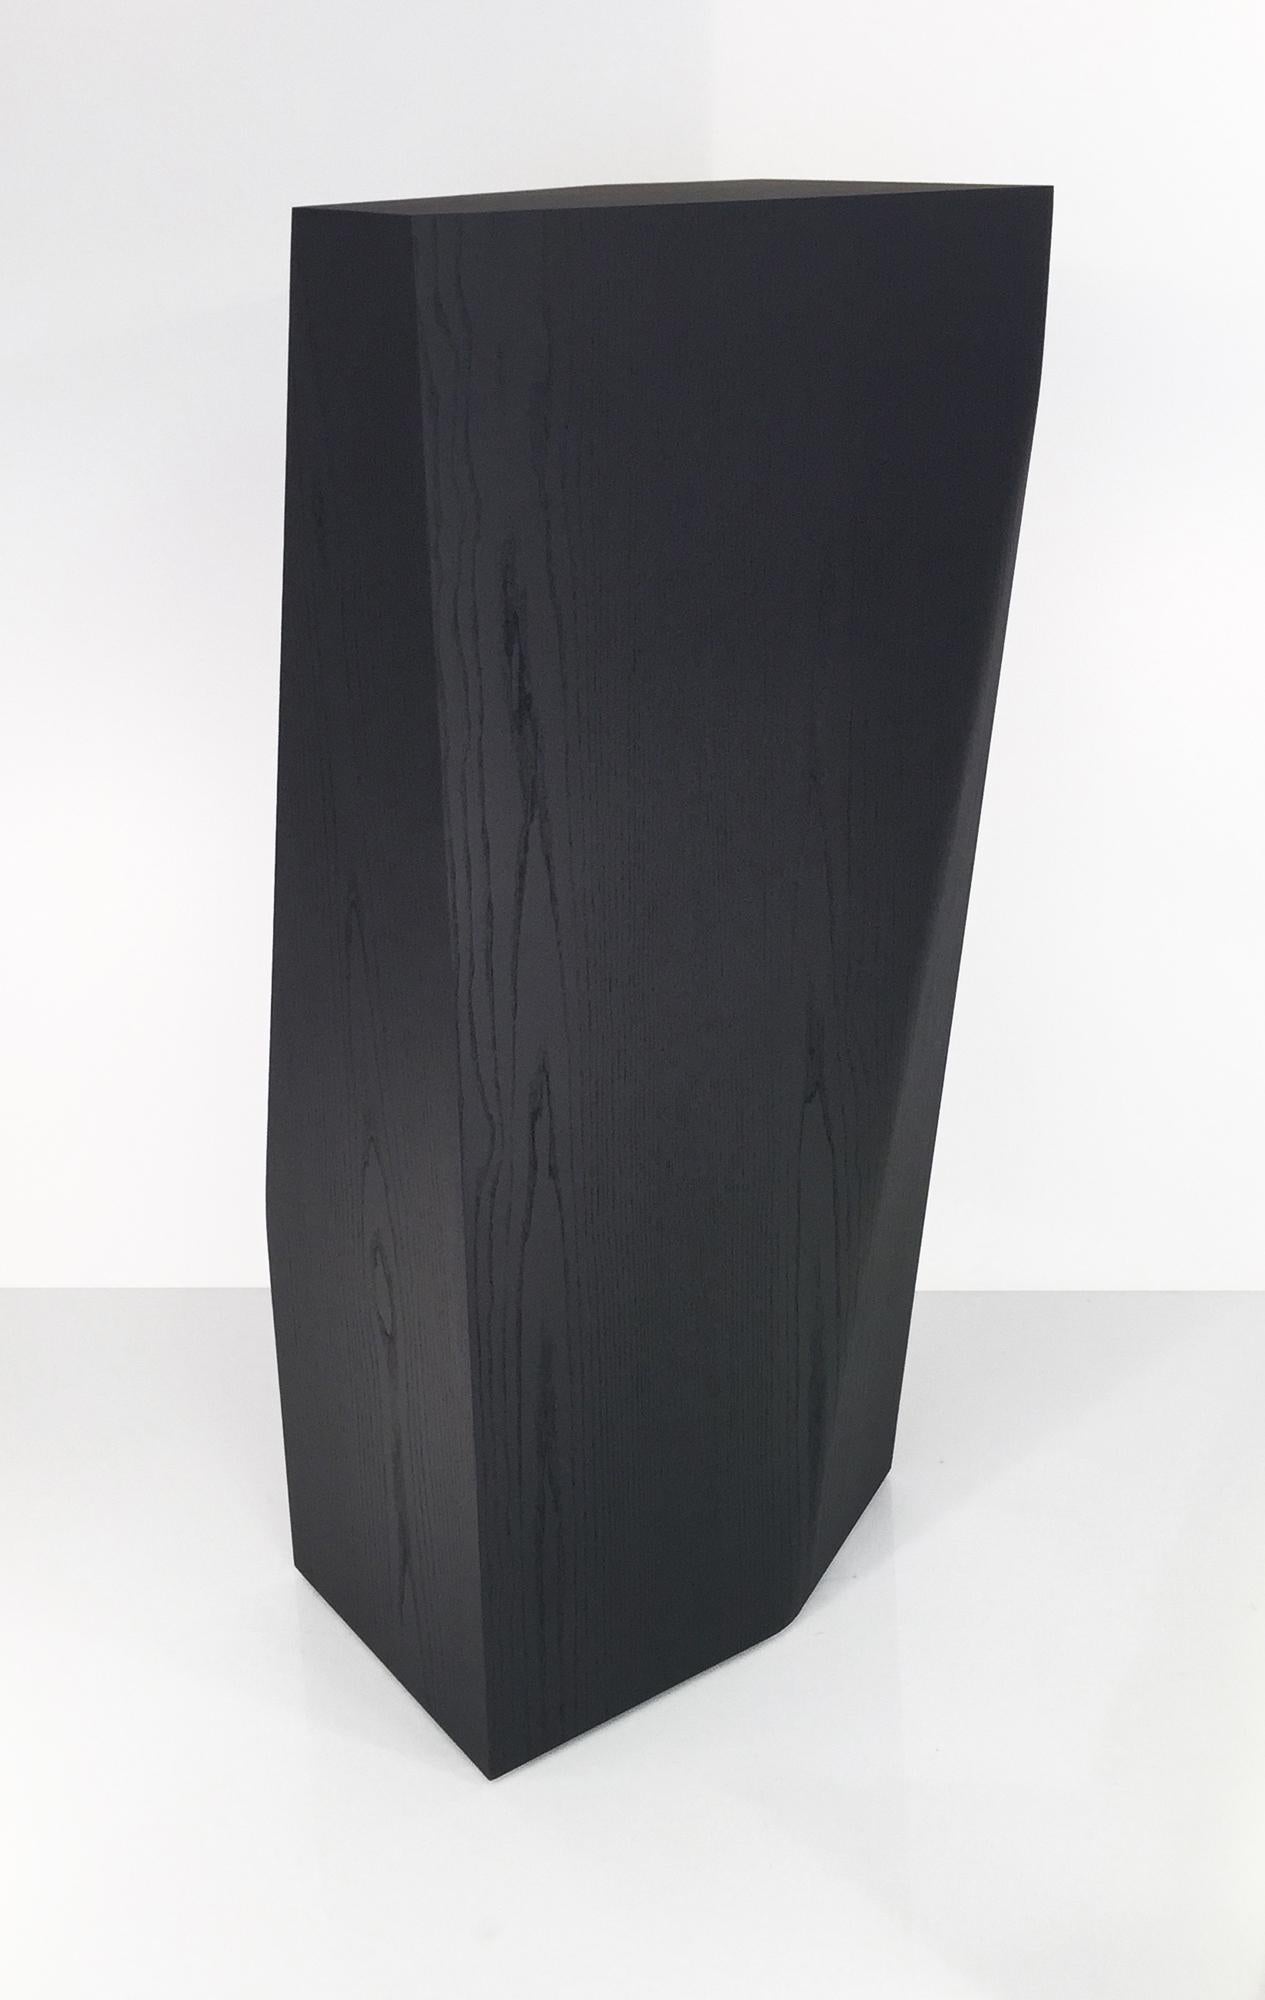 'scarecrow' william earle's modernist pedestal still made by hand by the artist 1